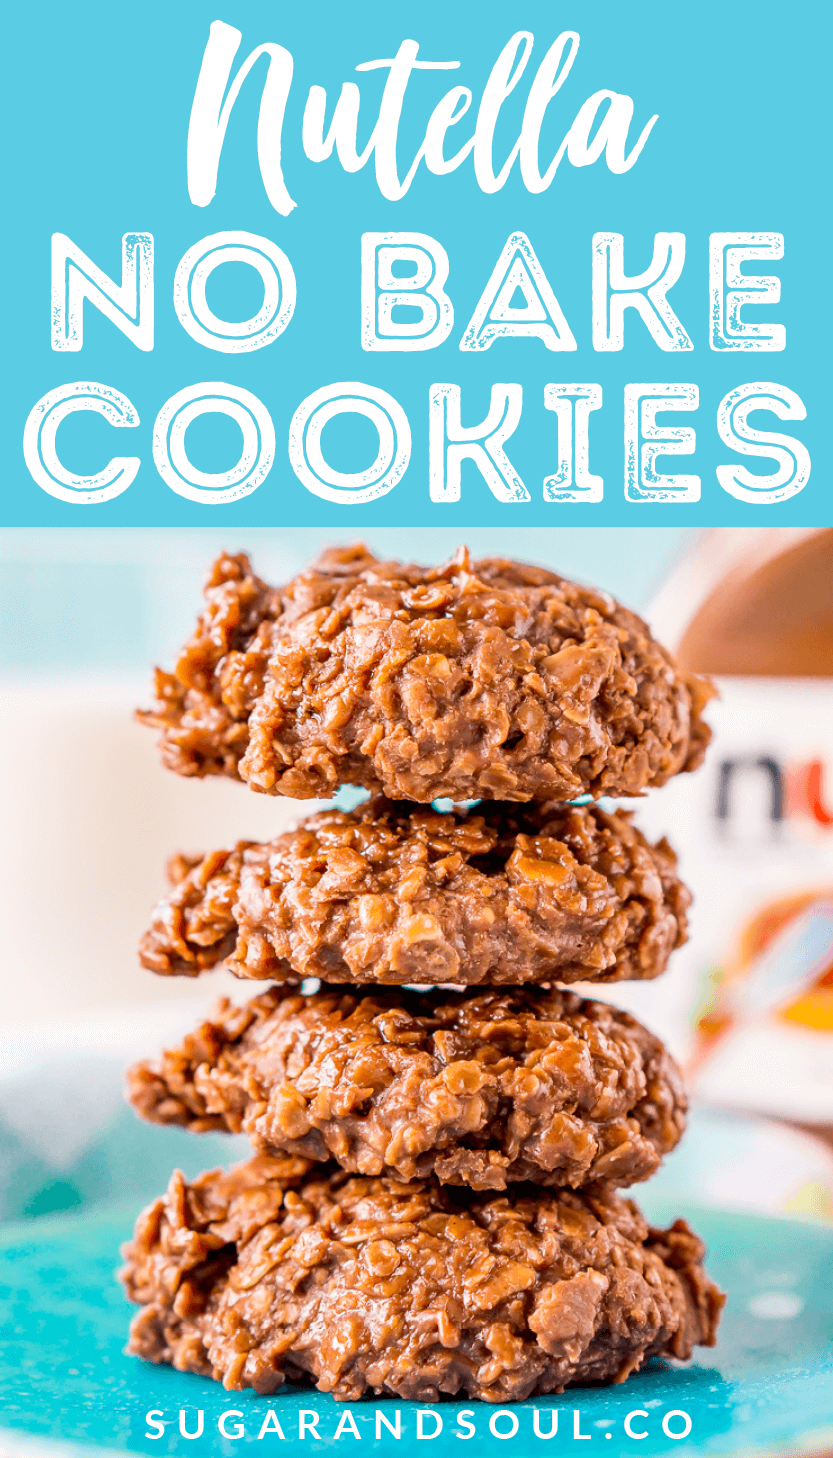 Nutella No Bake Cookies are a yummy way to enjoy the chocolate and hazelnut flavors of everyone’s favorite spread! Made with oatmeal, butter, sugar, milk, vanilla, and Nutella, this recipe is as easy to make as it is delicious! via @sugarandsoulco